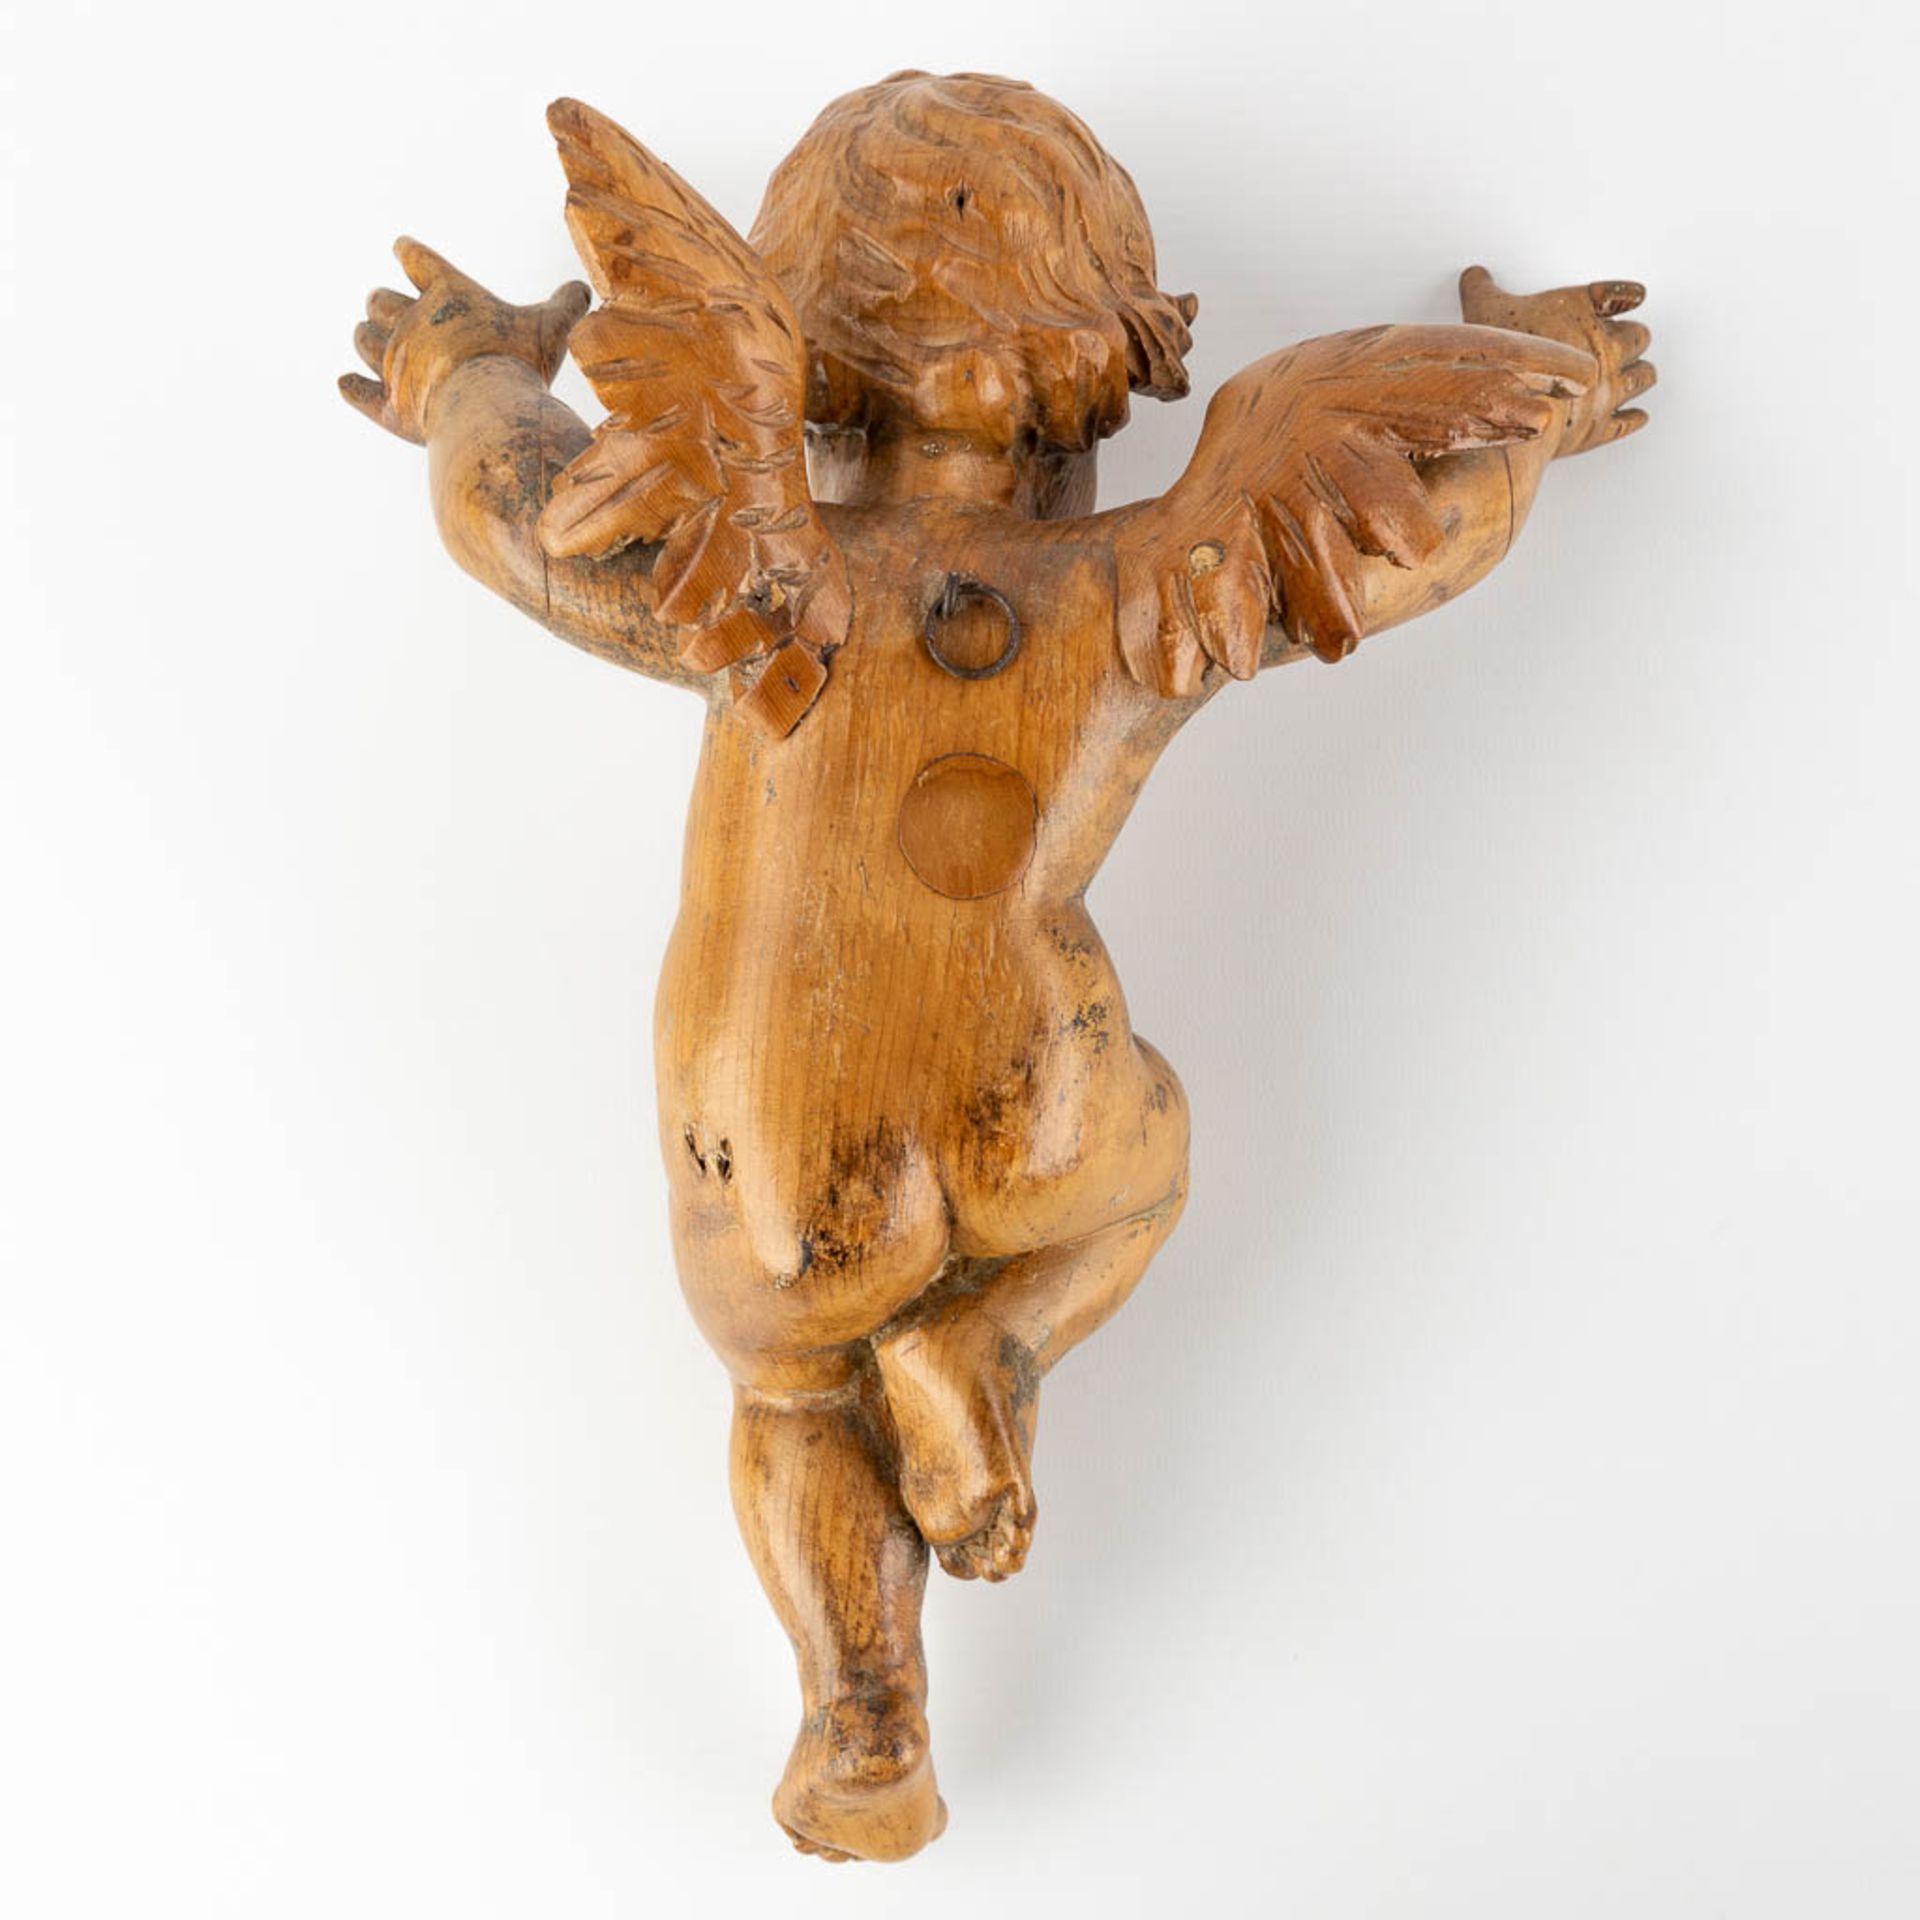 A pair of wood-sculptured putti, basswood, 18th C. (W:22 x H:30 cm) - Image 8 of 14